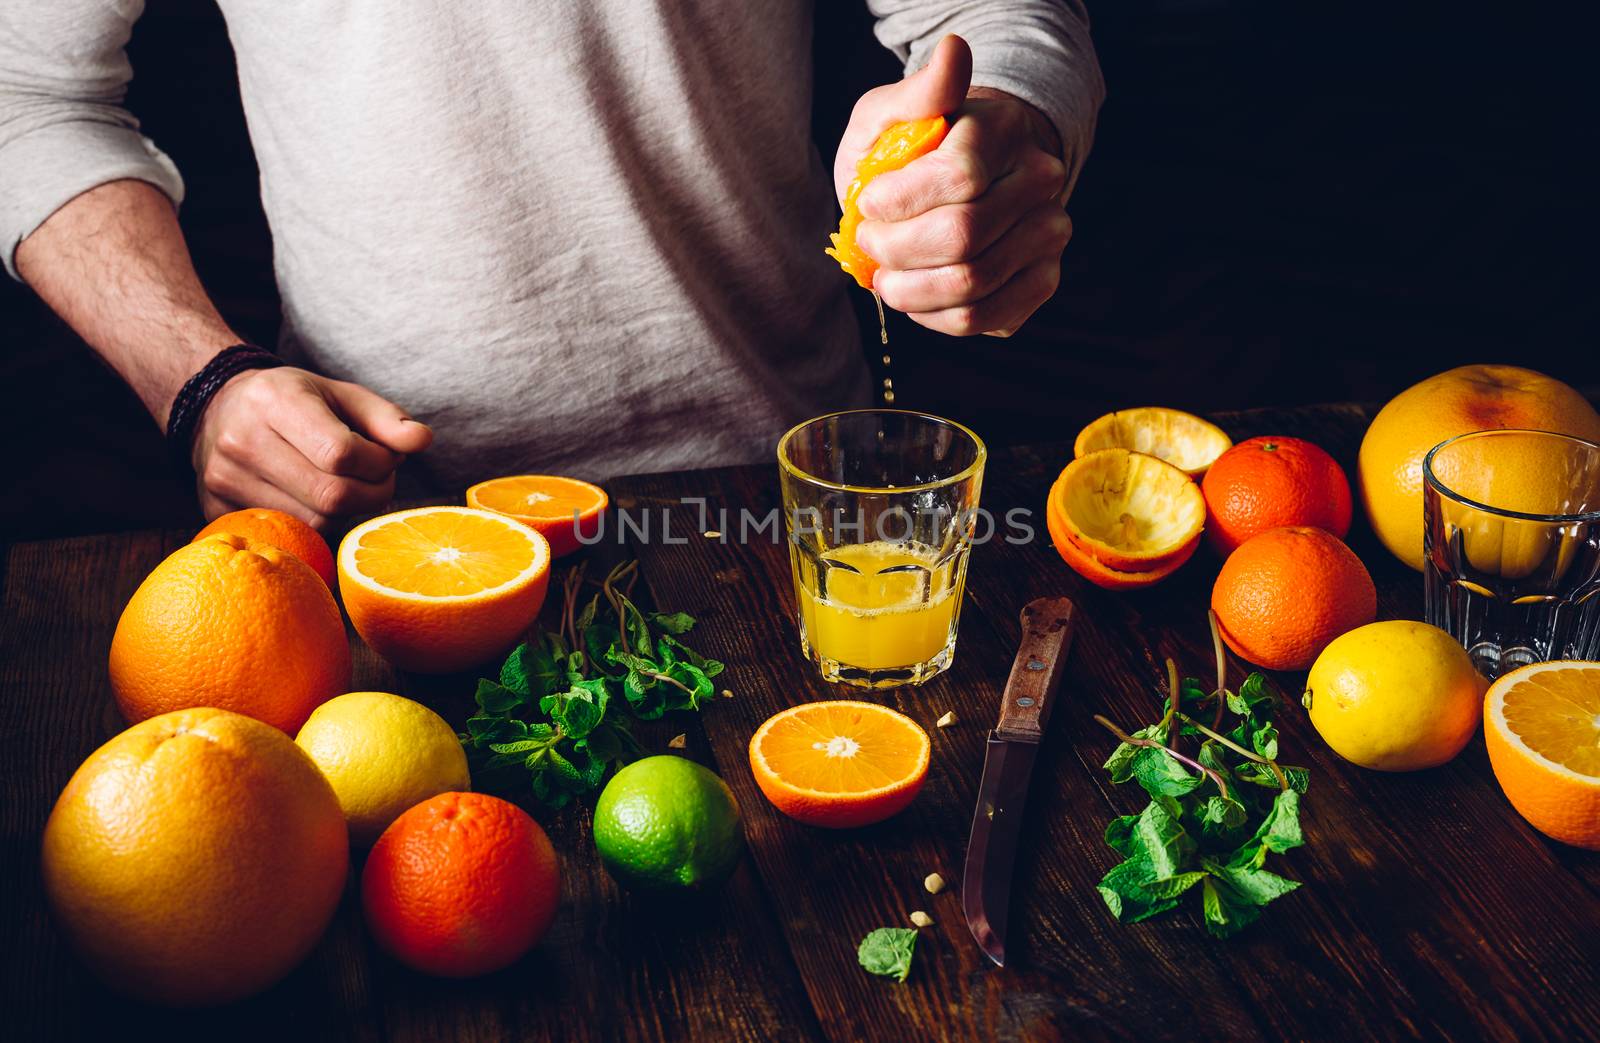 Guy Prepare the Citrus Cocktail. Glass of Juice, Fruits and Mint on Table.